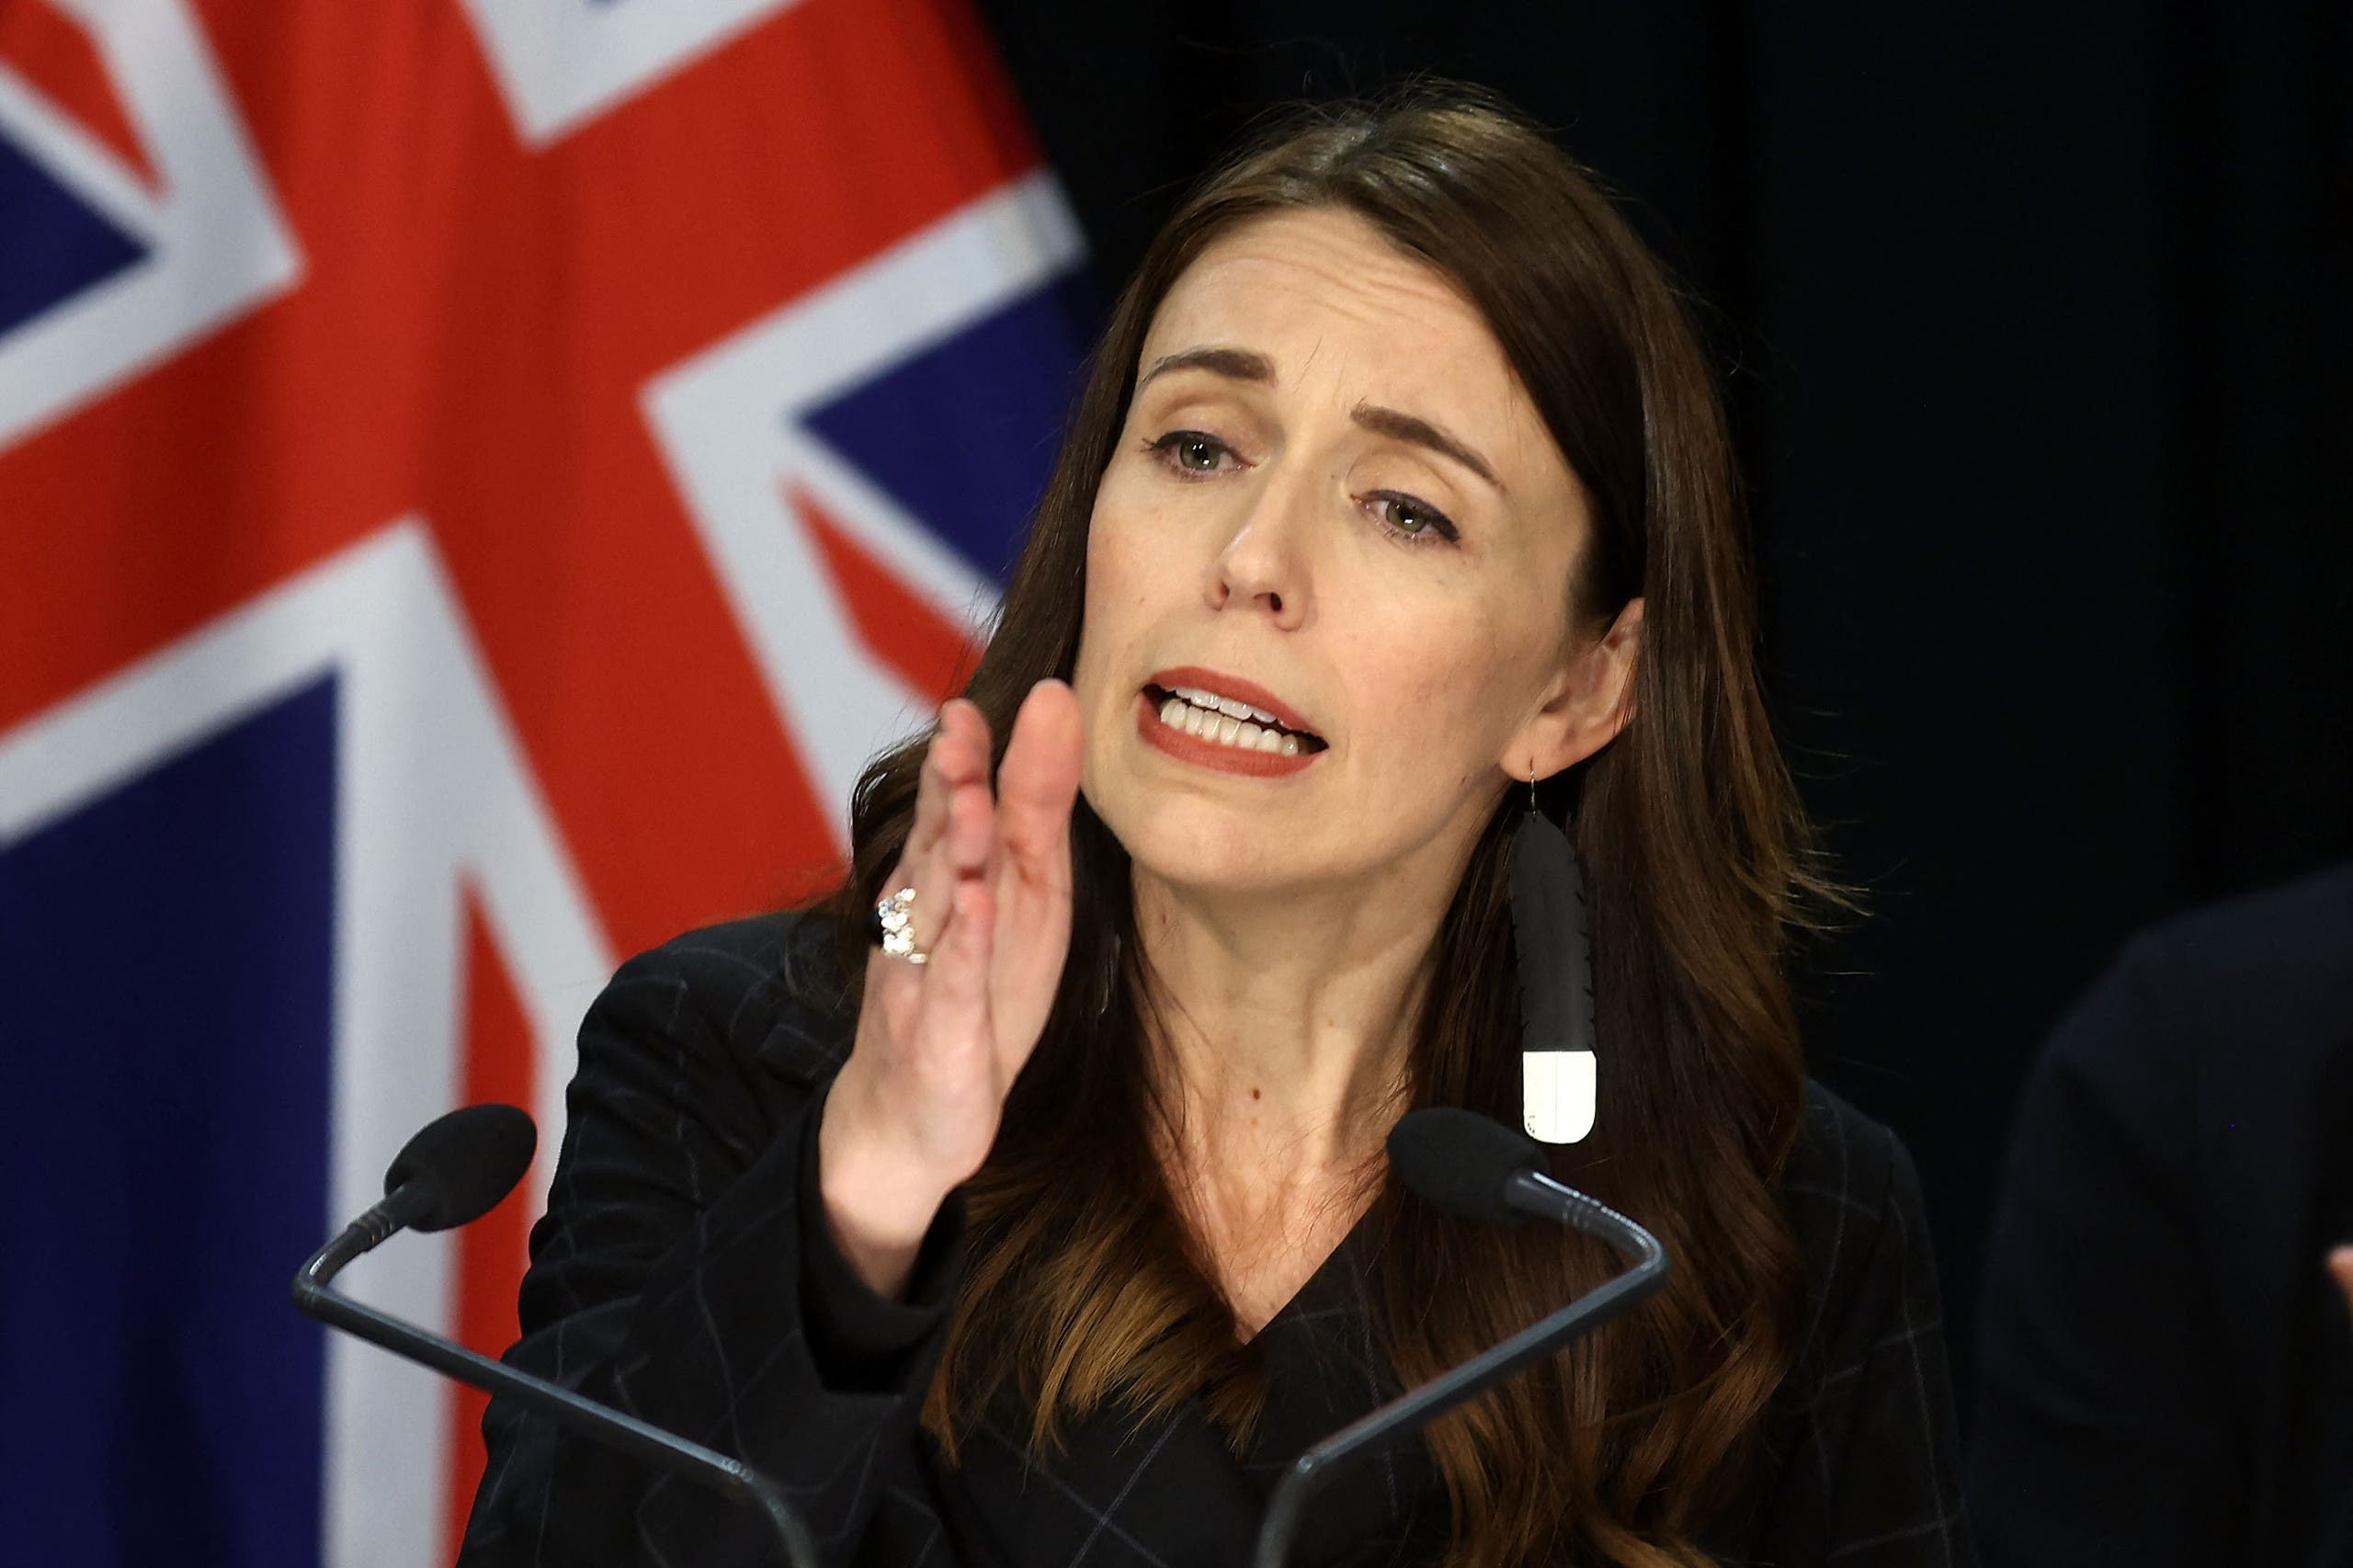 New Zealand's Prime Minister Jacinda Ardern speak during a press conference about the charges laid over the 2019 White Island volcanic eruption, in Wellington on November 30, 2020. (File photo: AFP)